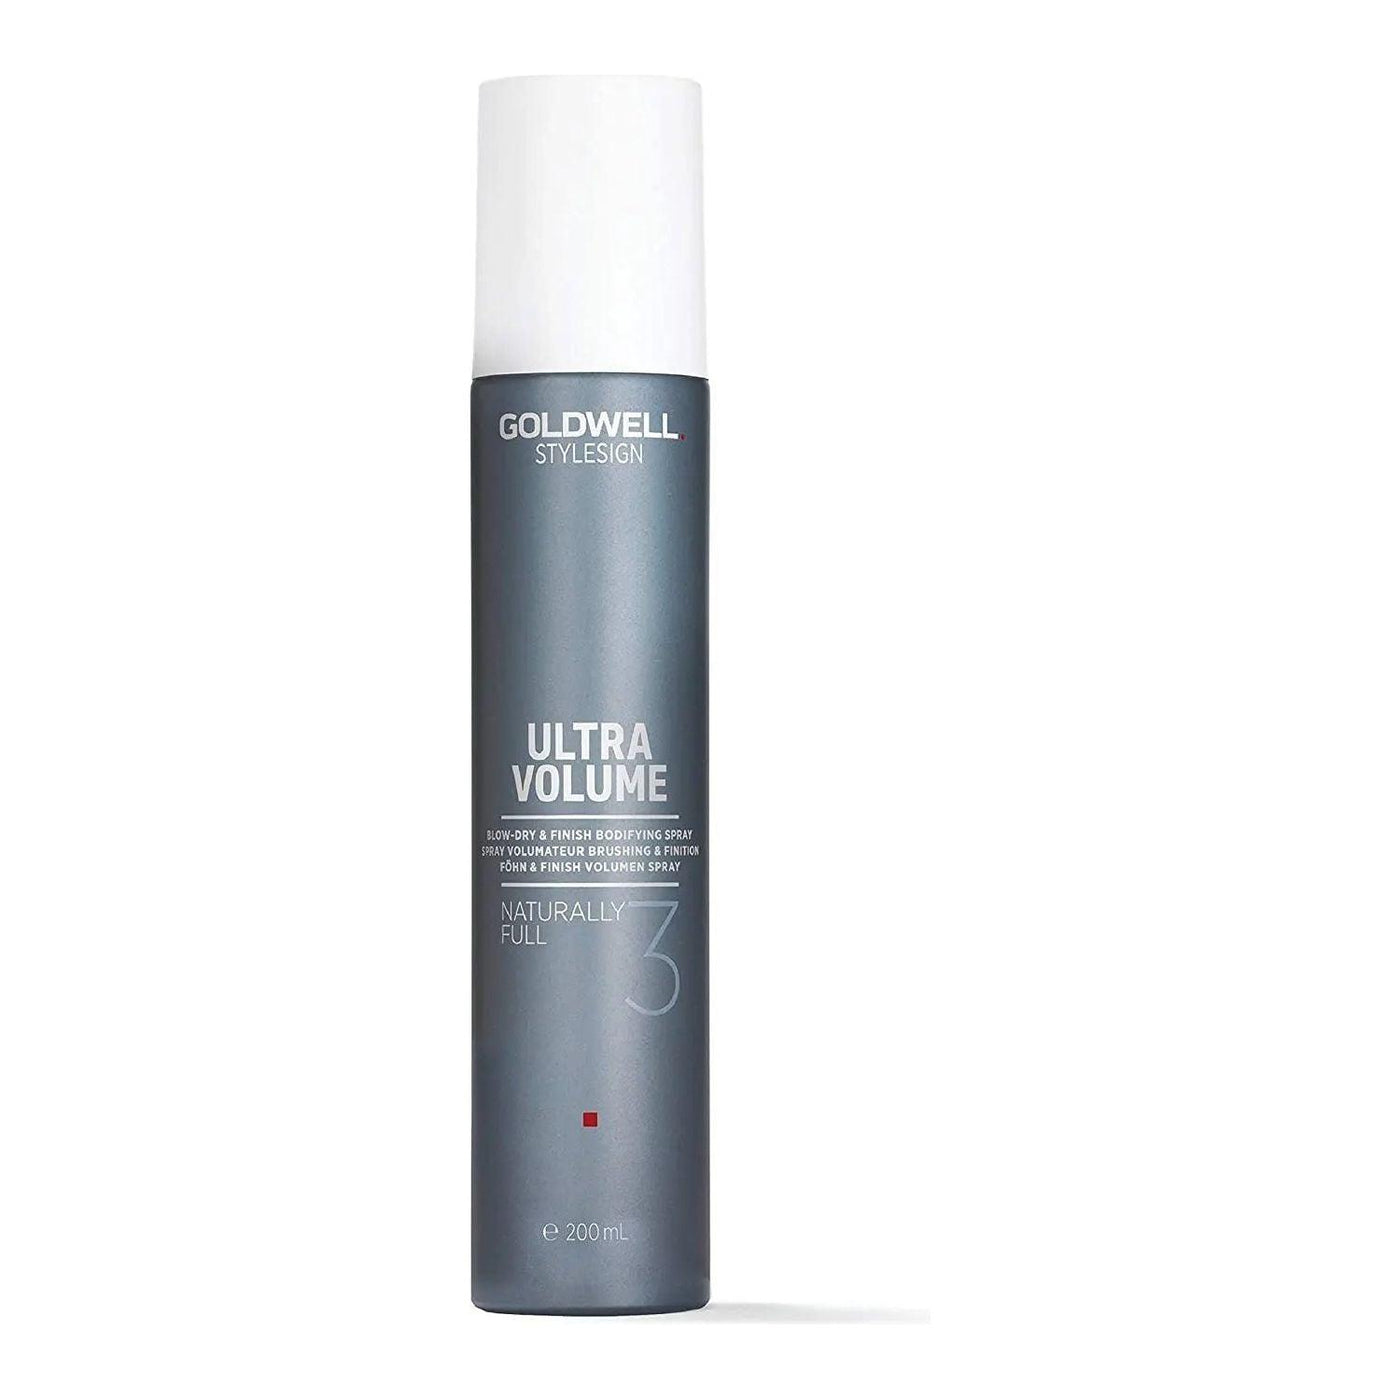 Goldwell Stylesign Ultra Volume Naturally Full Blow-dry & Finish Bodifying Spray Goldwell Boutique Deauville